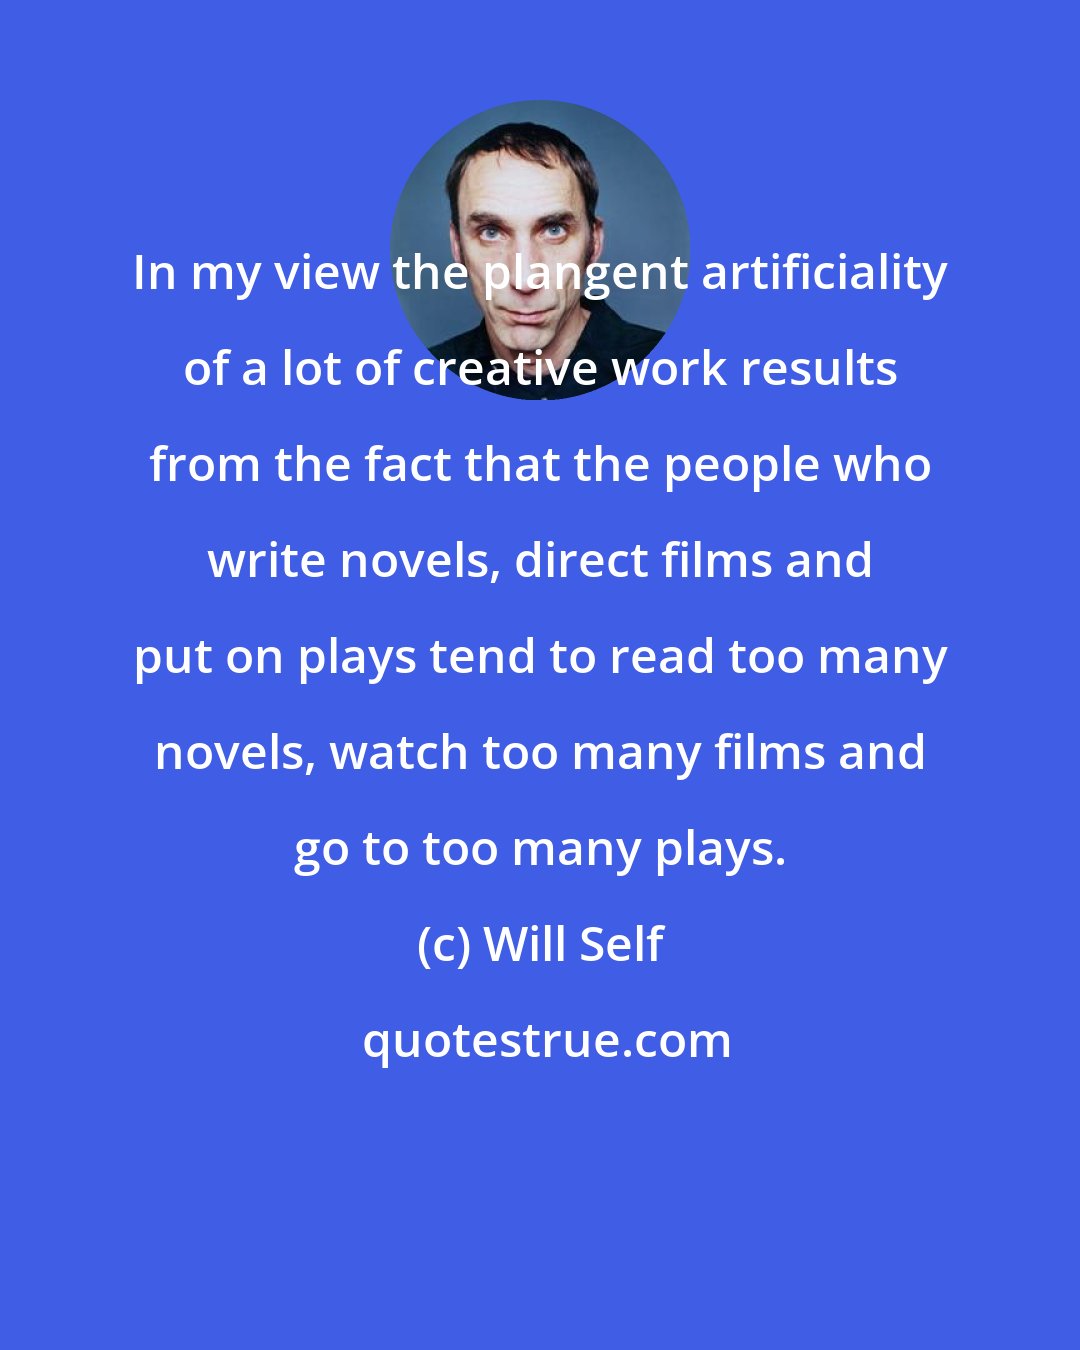 Will Self: In my view the plangent artificiality of a lot of creative work results from the fact that the people who write novels, direct films and put on plays tend to read too many novels, watch too many films and go to too many plays.